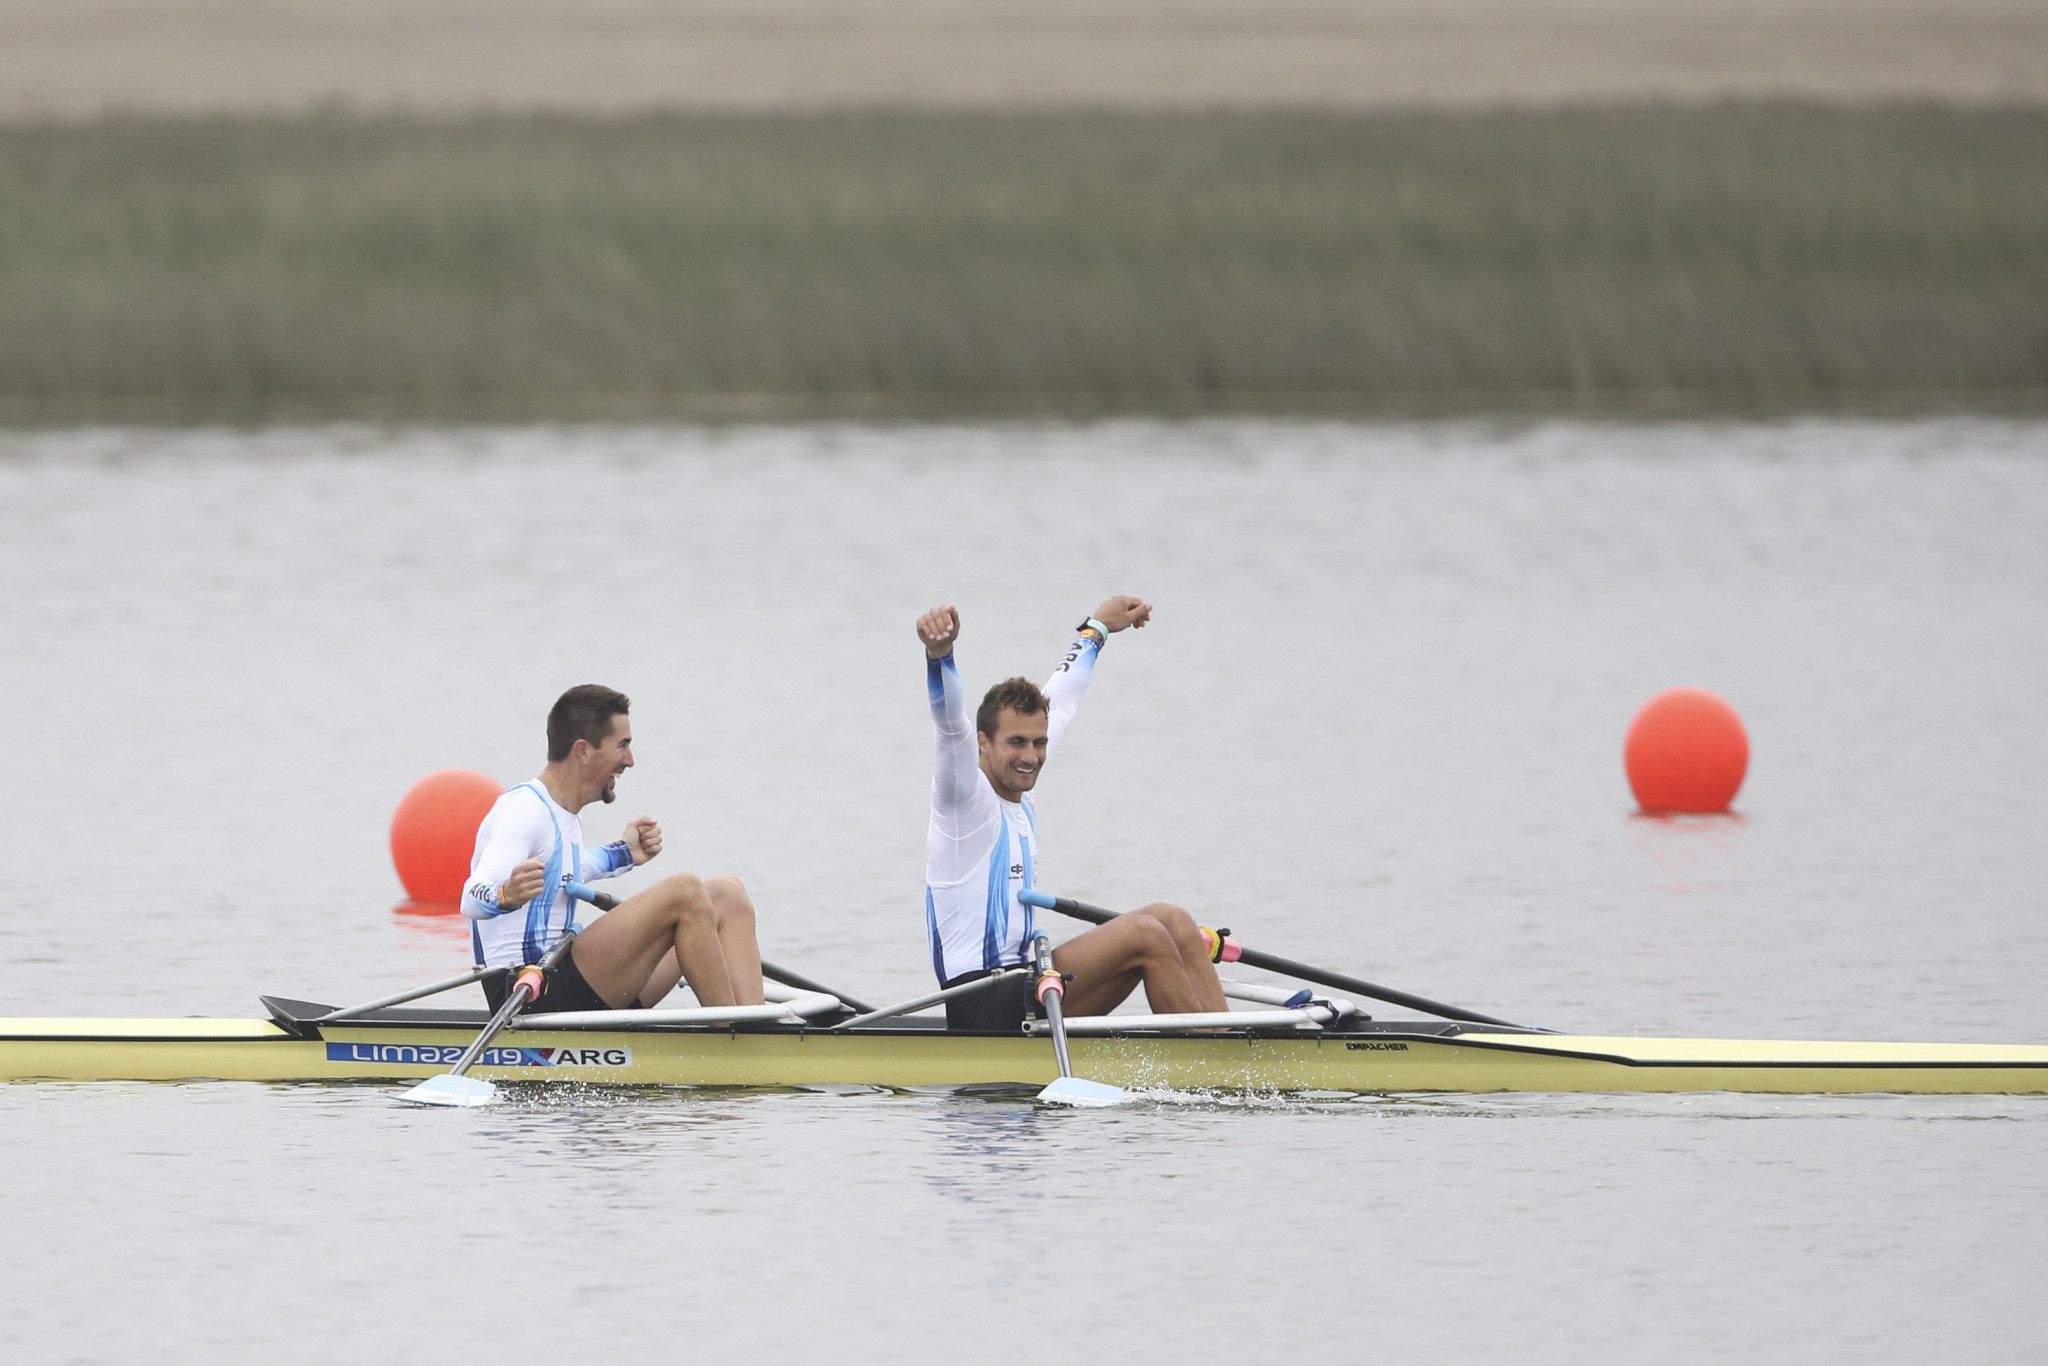 The first gold medallists were Argentina's Rodrigo Murillo and Cristina Rosso in the men's double sculls ©Lima 2019